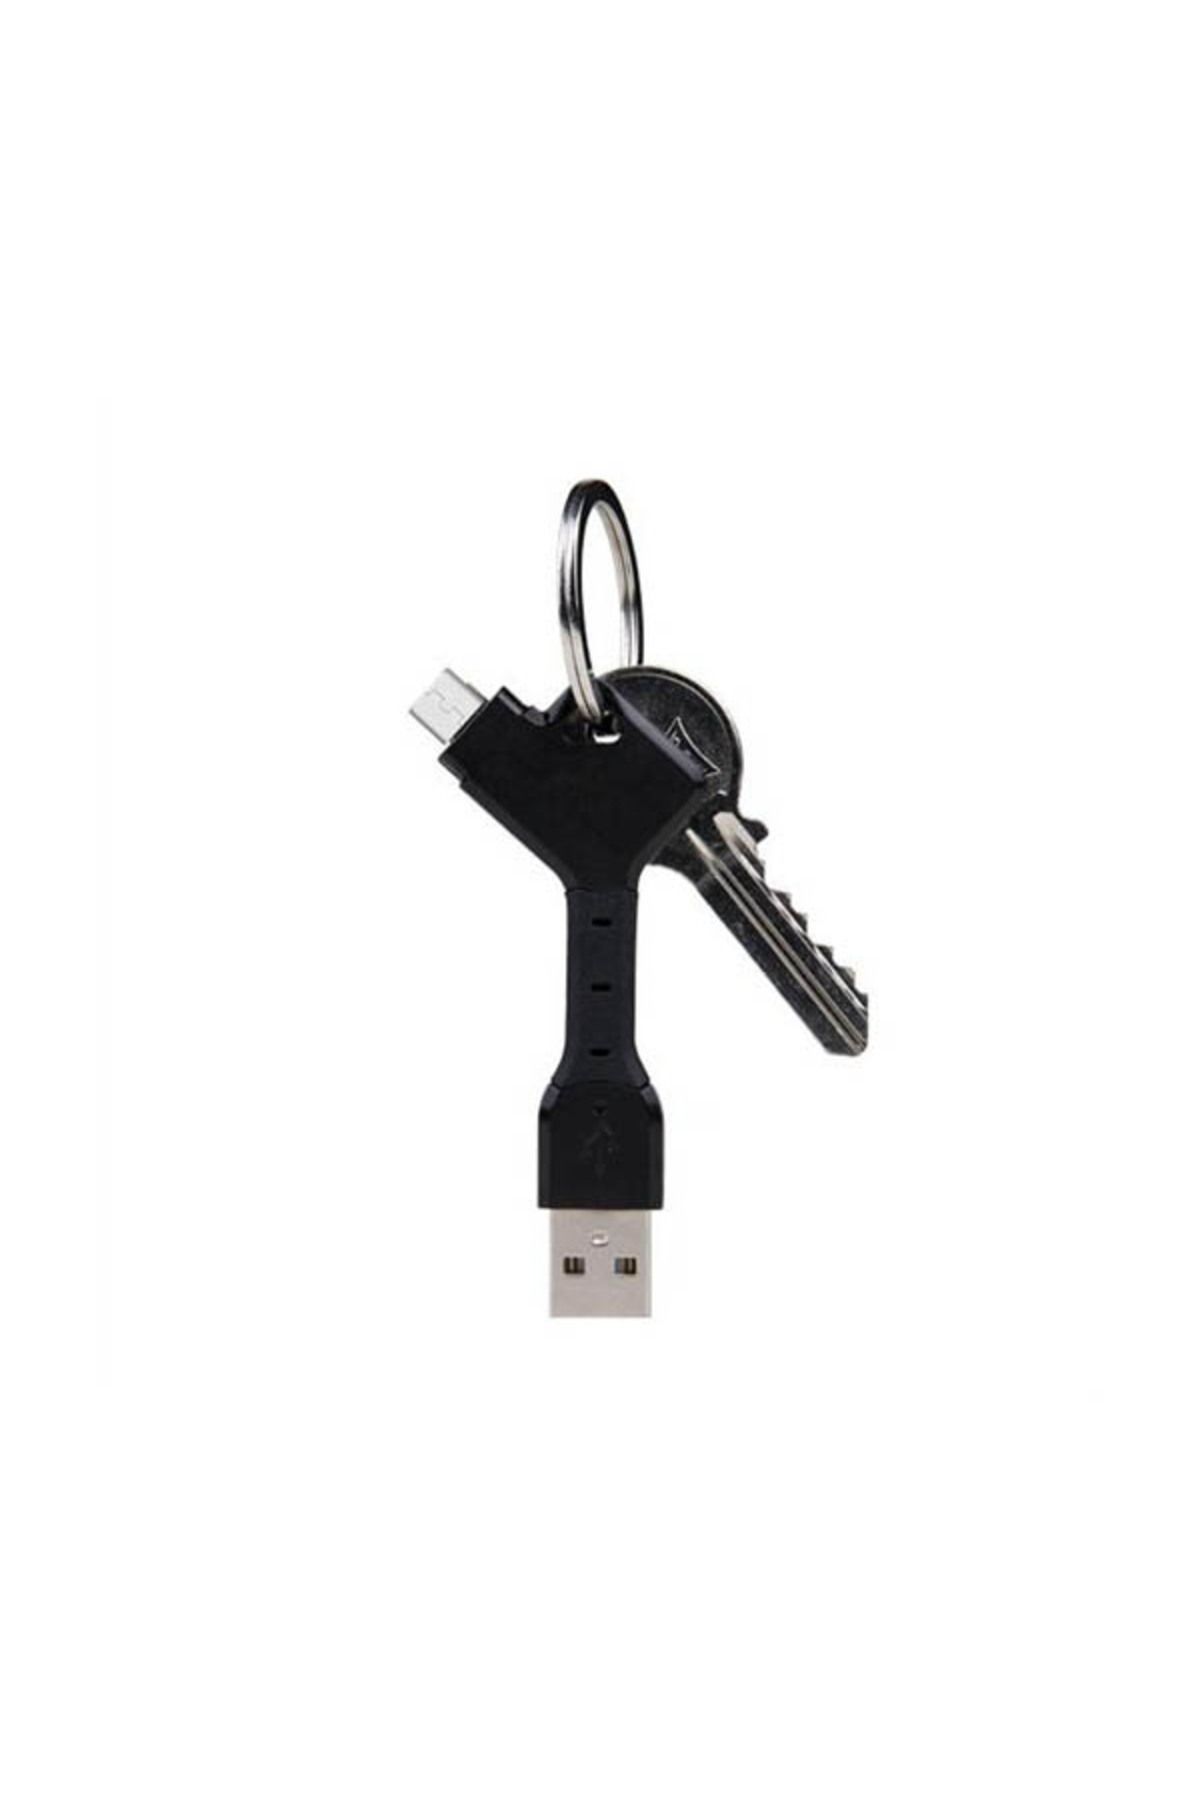 Ttec Chargekey Micro Usb Cable